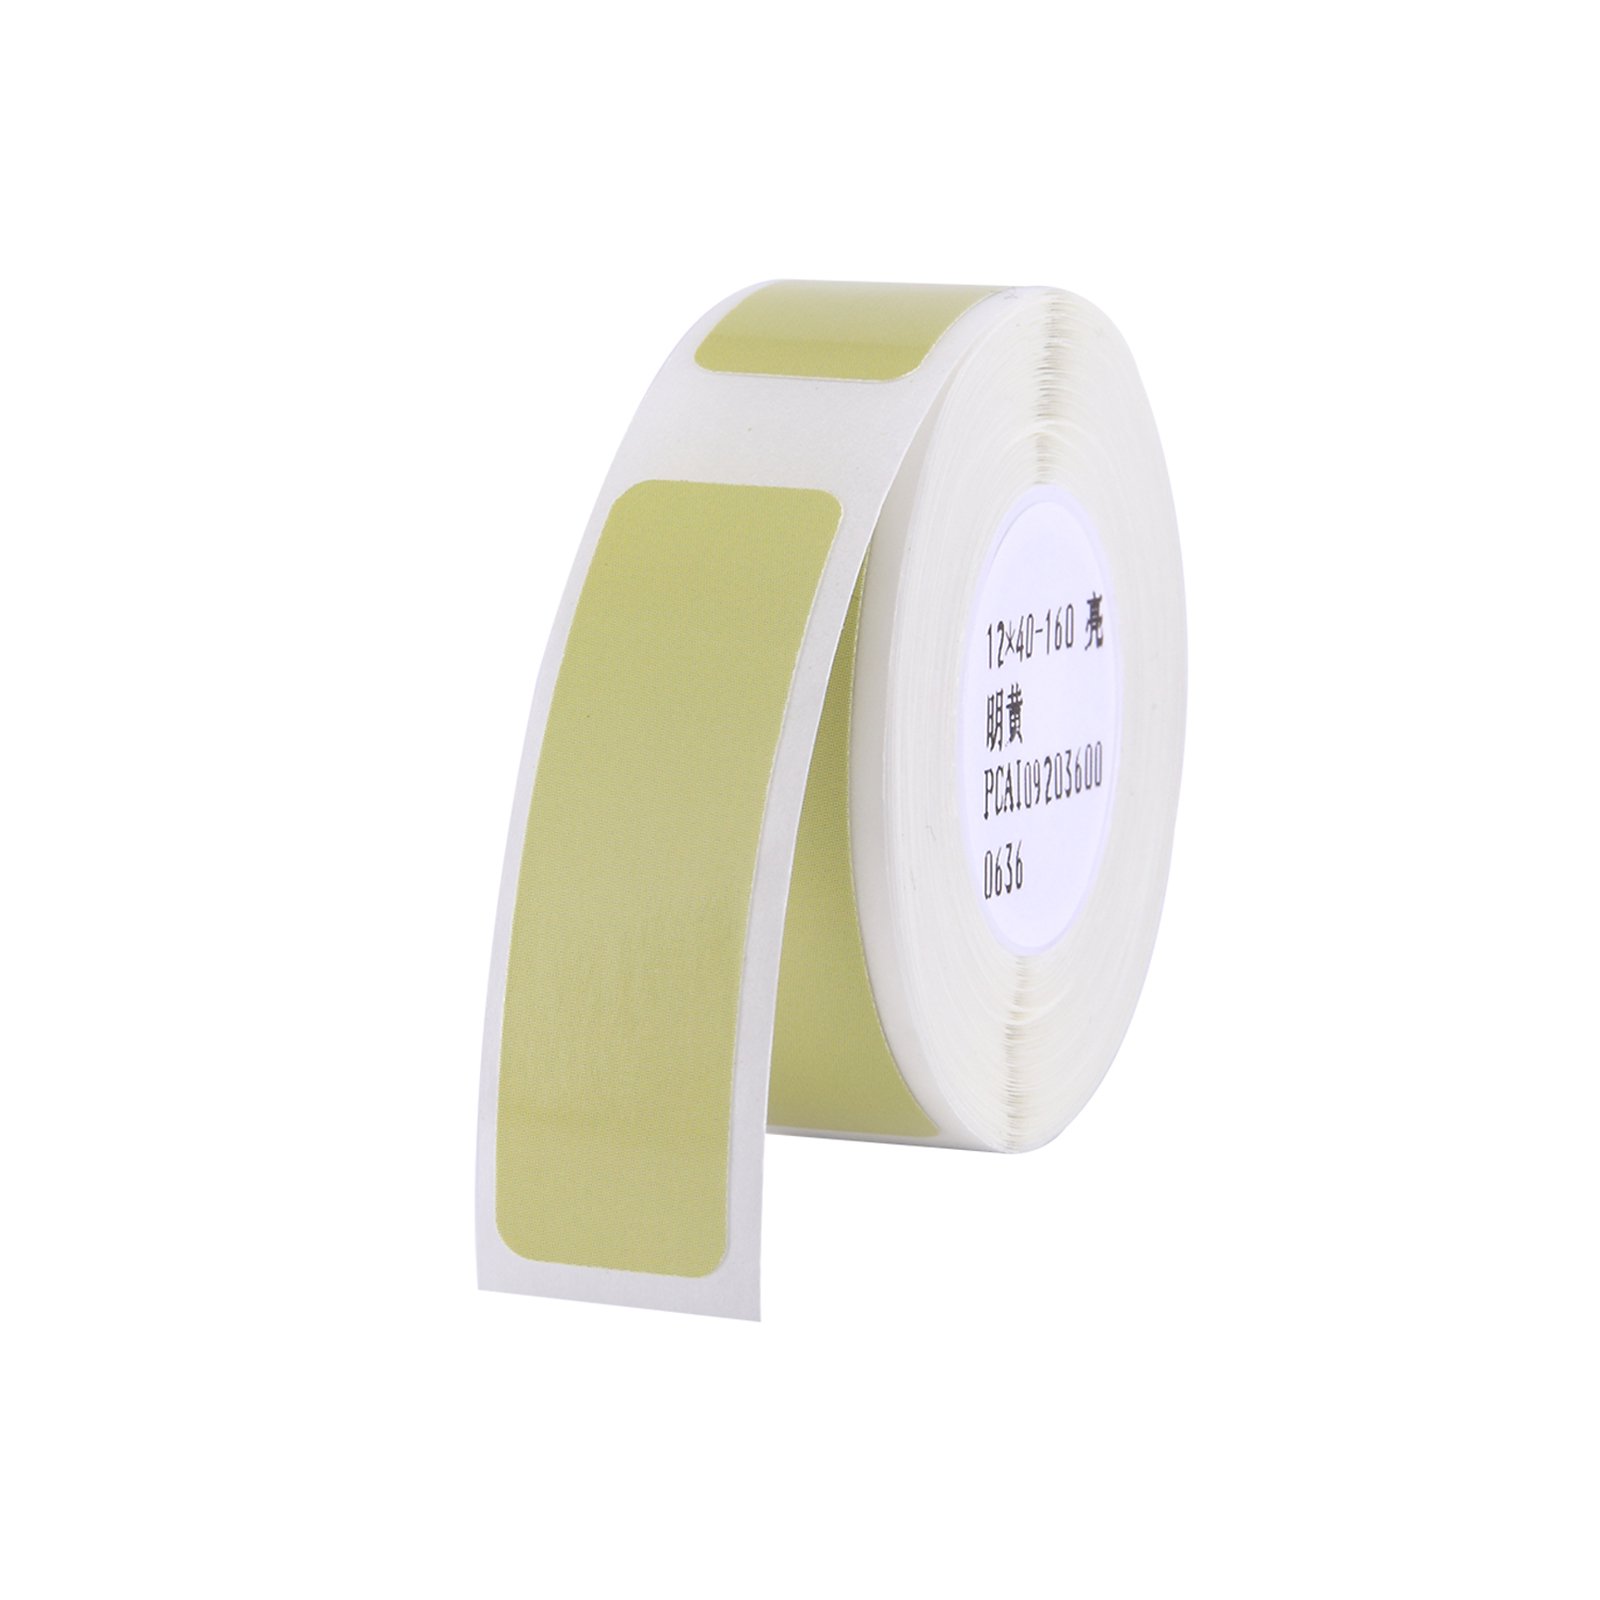 Thermal Printing Label Paper Barcode Price Size Name Blank Labels Waterproof Tear Resistant 12*40mm 160pcs/roll for Home Organizer Supermarket Store Catering